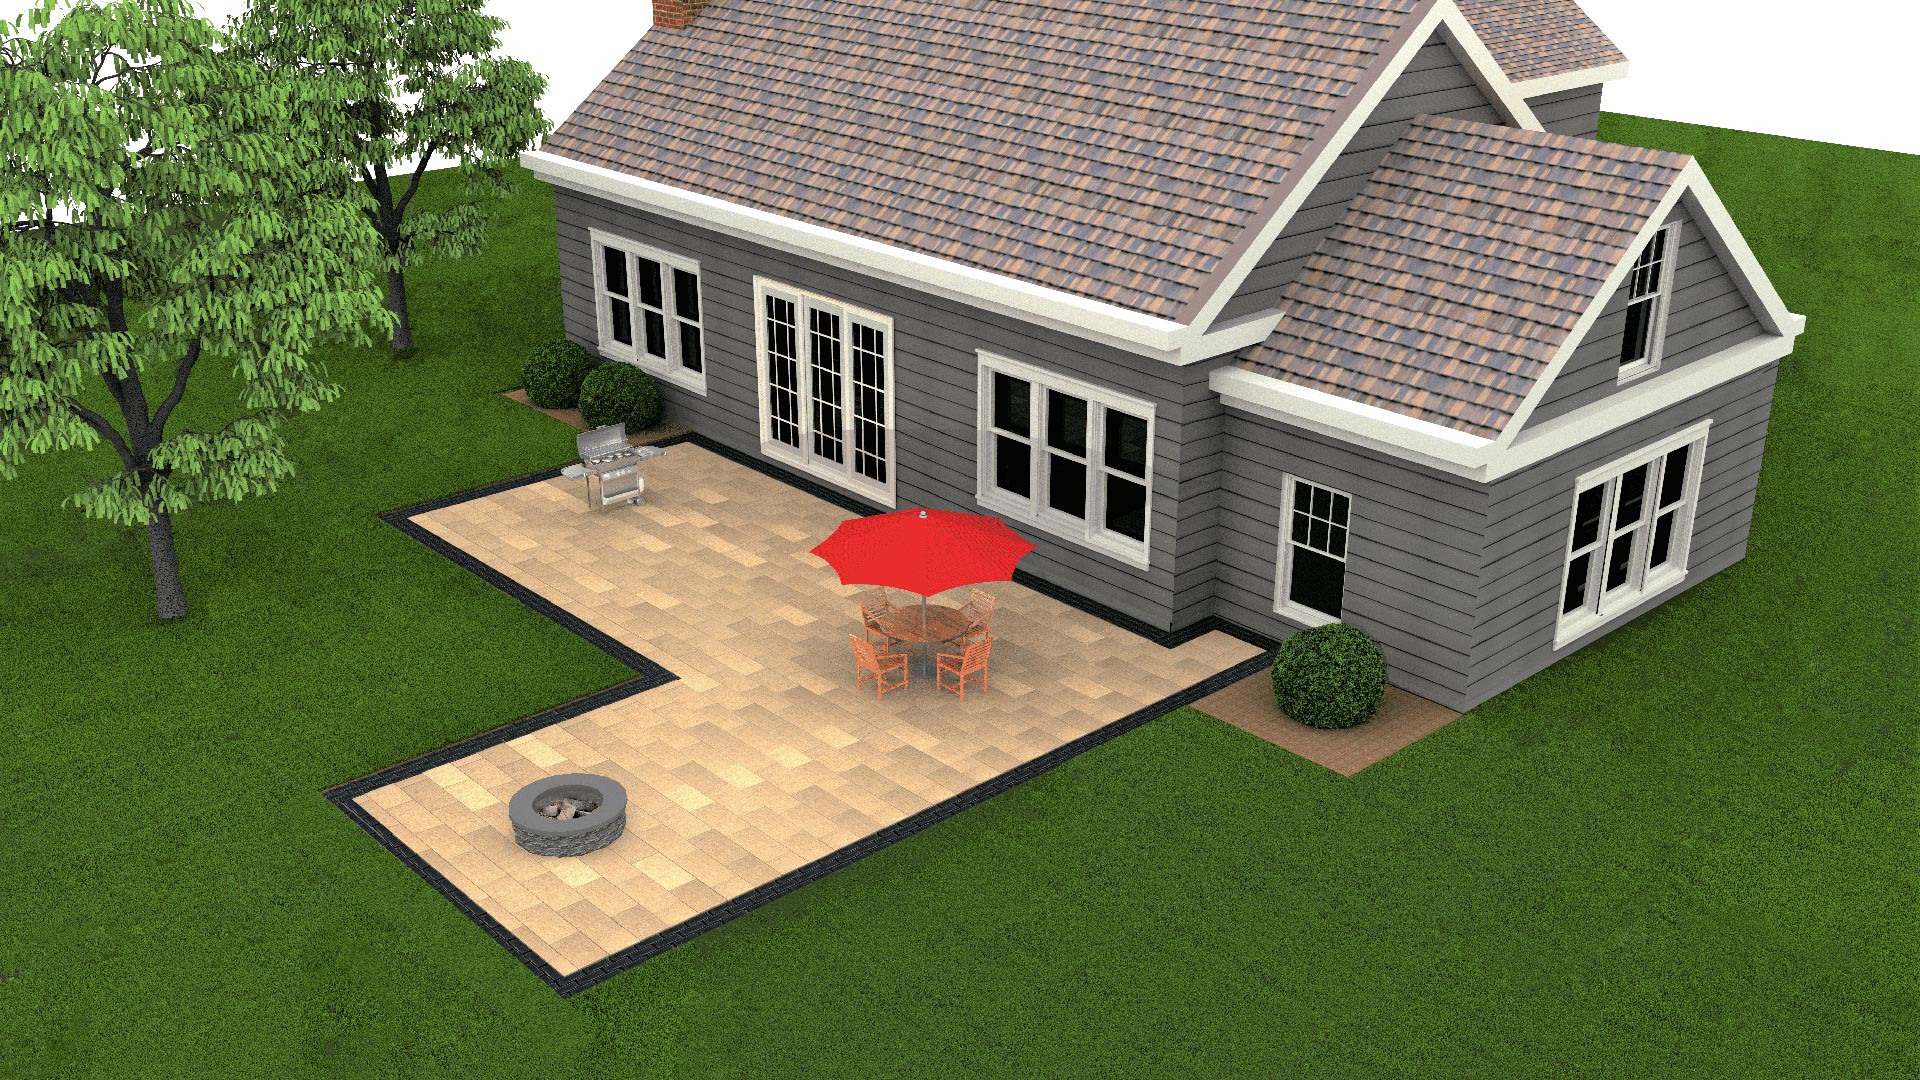 http://How%20to%20build%20a%20patio%20on%20grade